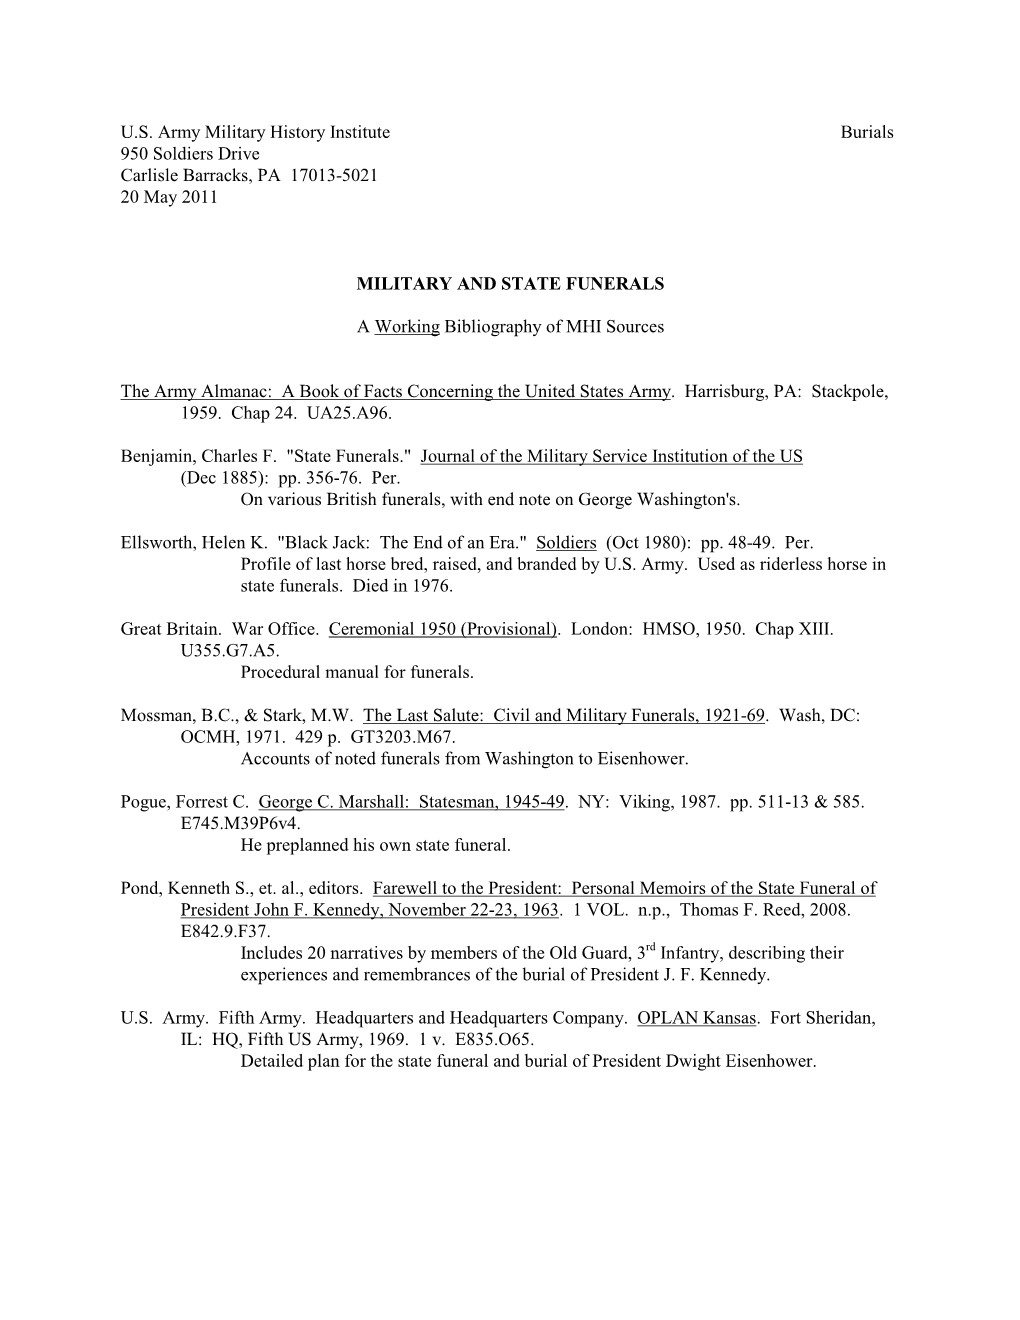 Military and State Funerals.Pdf